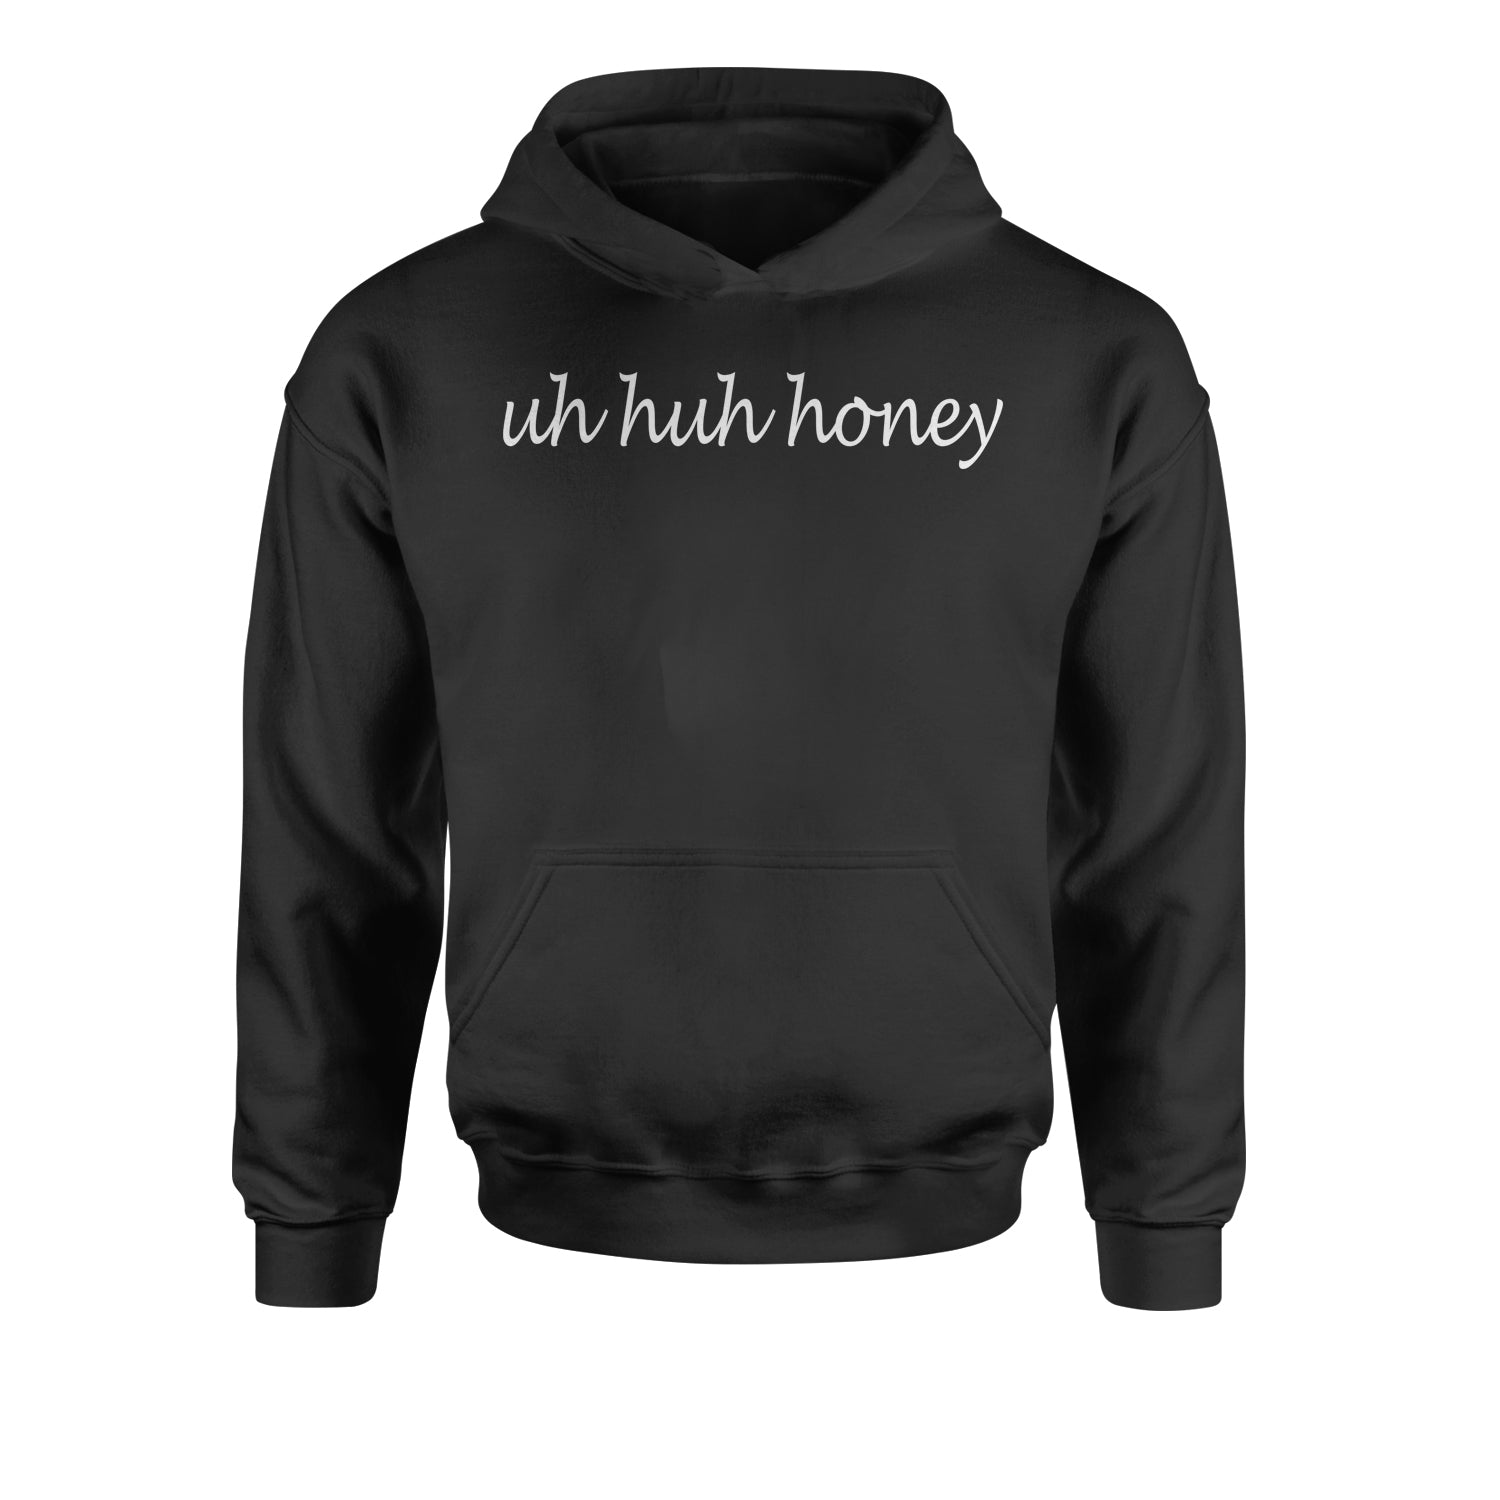 Uh Huh Honey Youth-Sized Hoodie uhhuh, uhuh, unhunh by Expression Tees